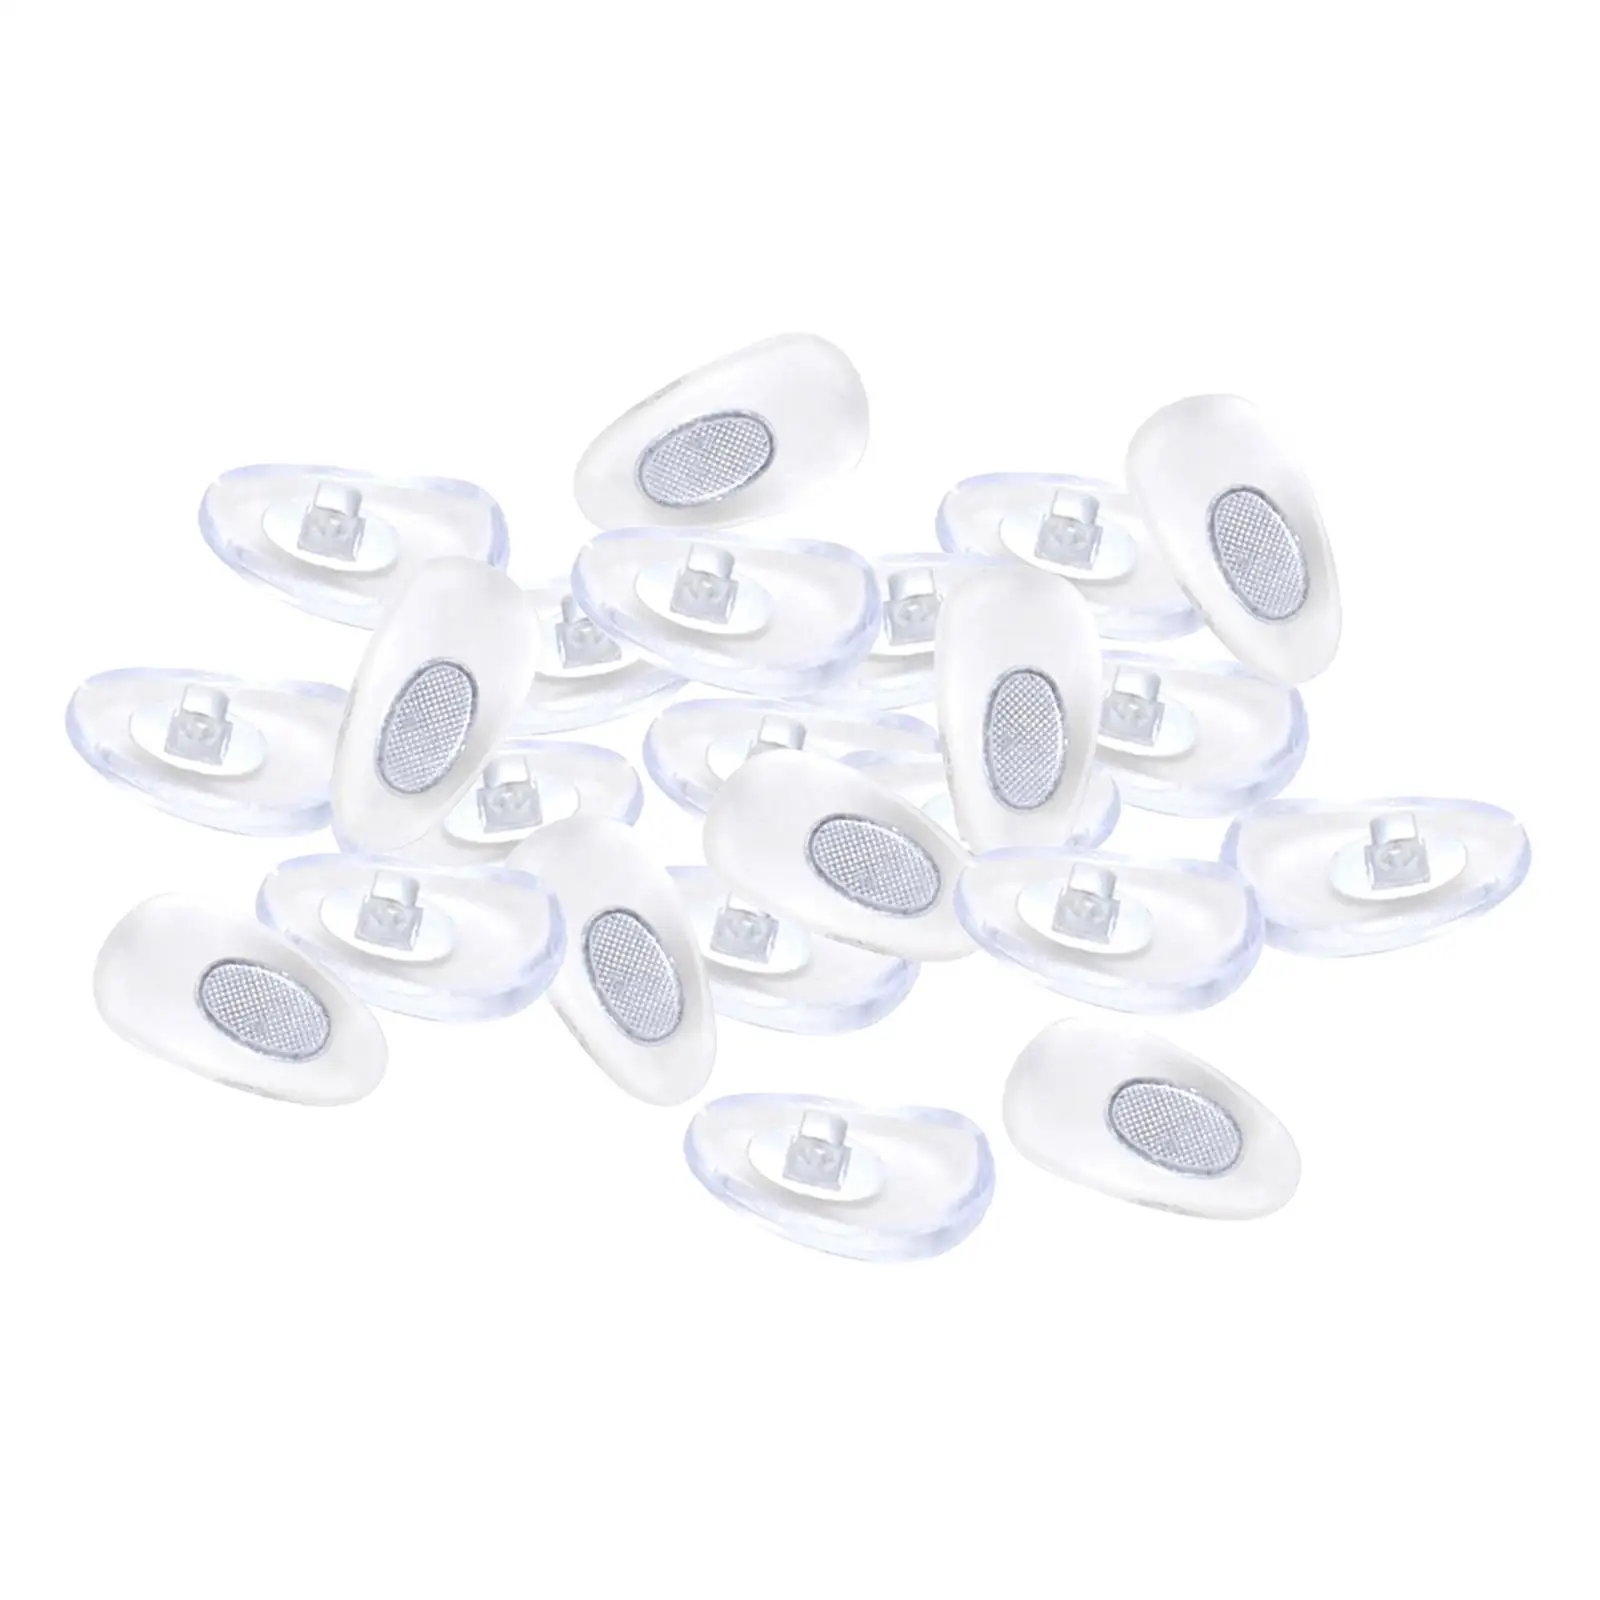 100Pcs Glasses Nose Pads with Metal Core Comfortable Nose Pieces Nose Bridge Pads Silicone Replacement for Eyeglasses Eyewear